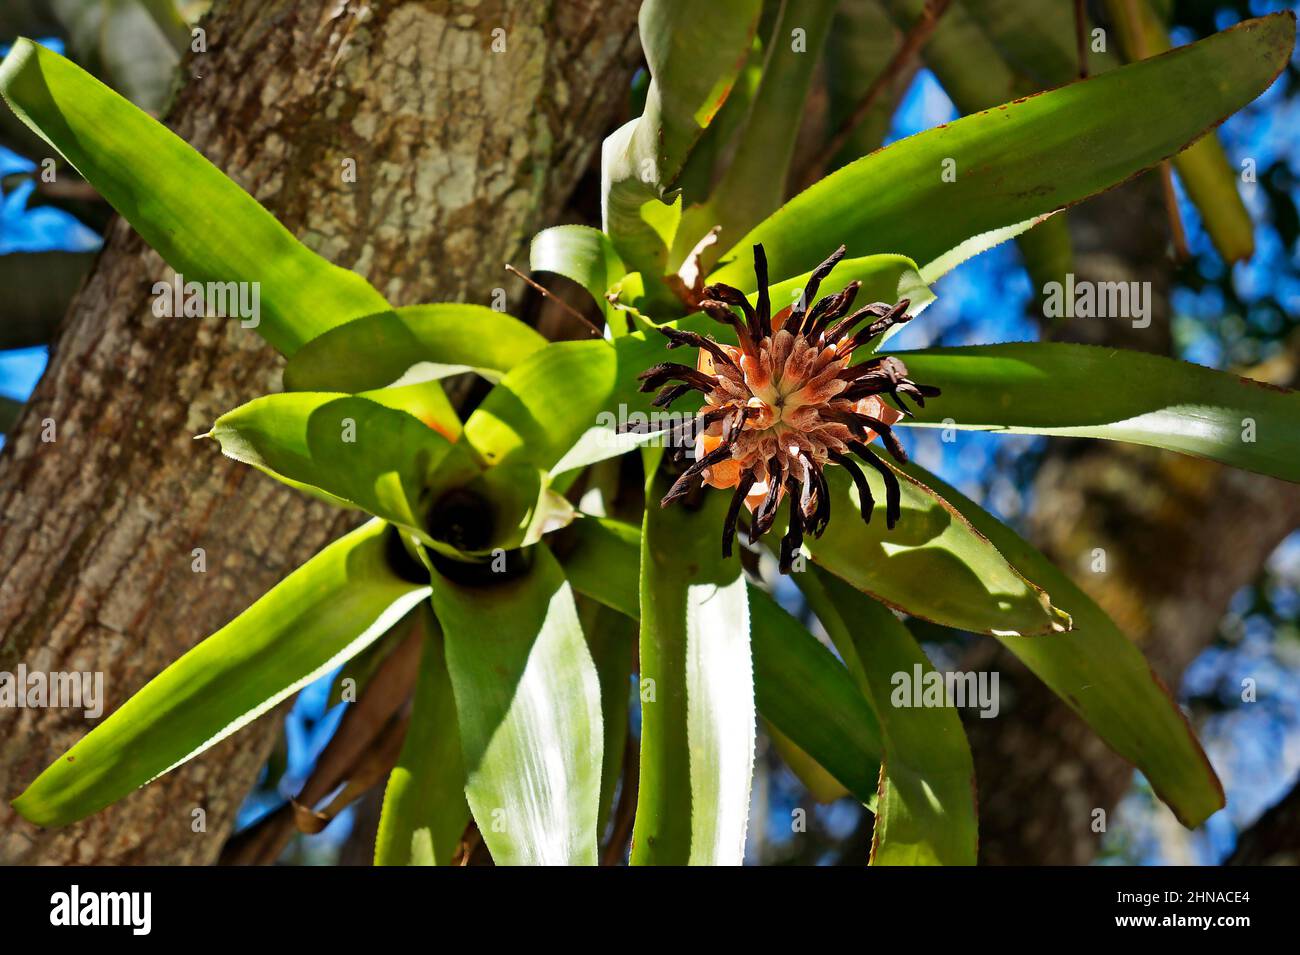 Withering bromeliad flower on tree Stock Photo